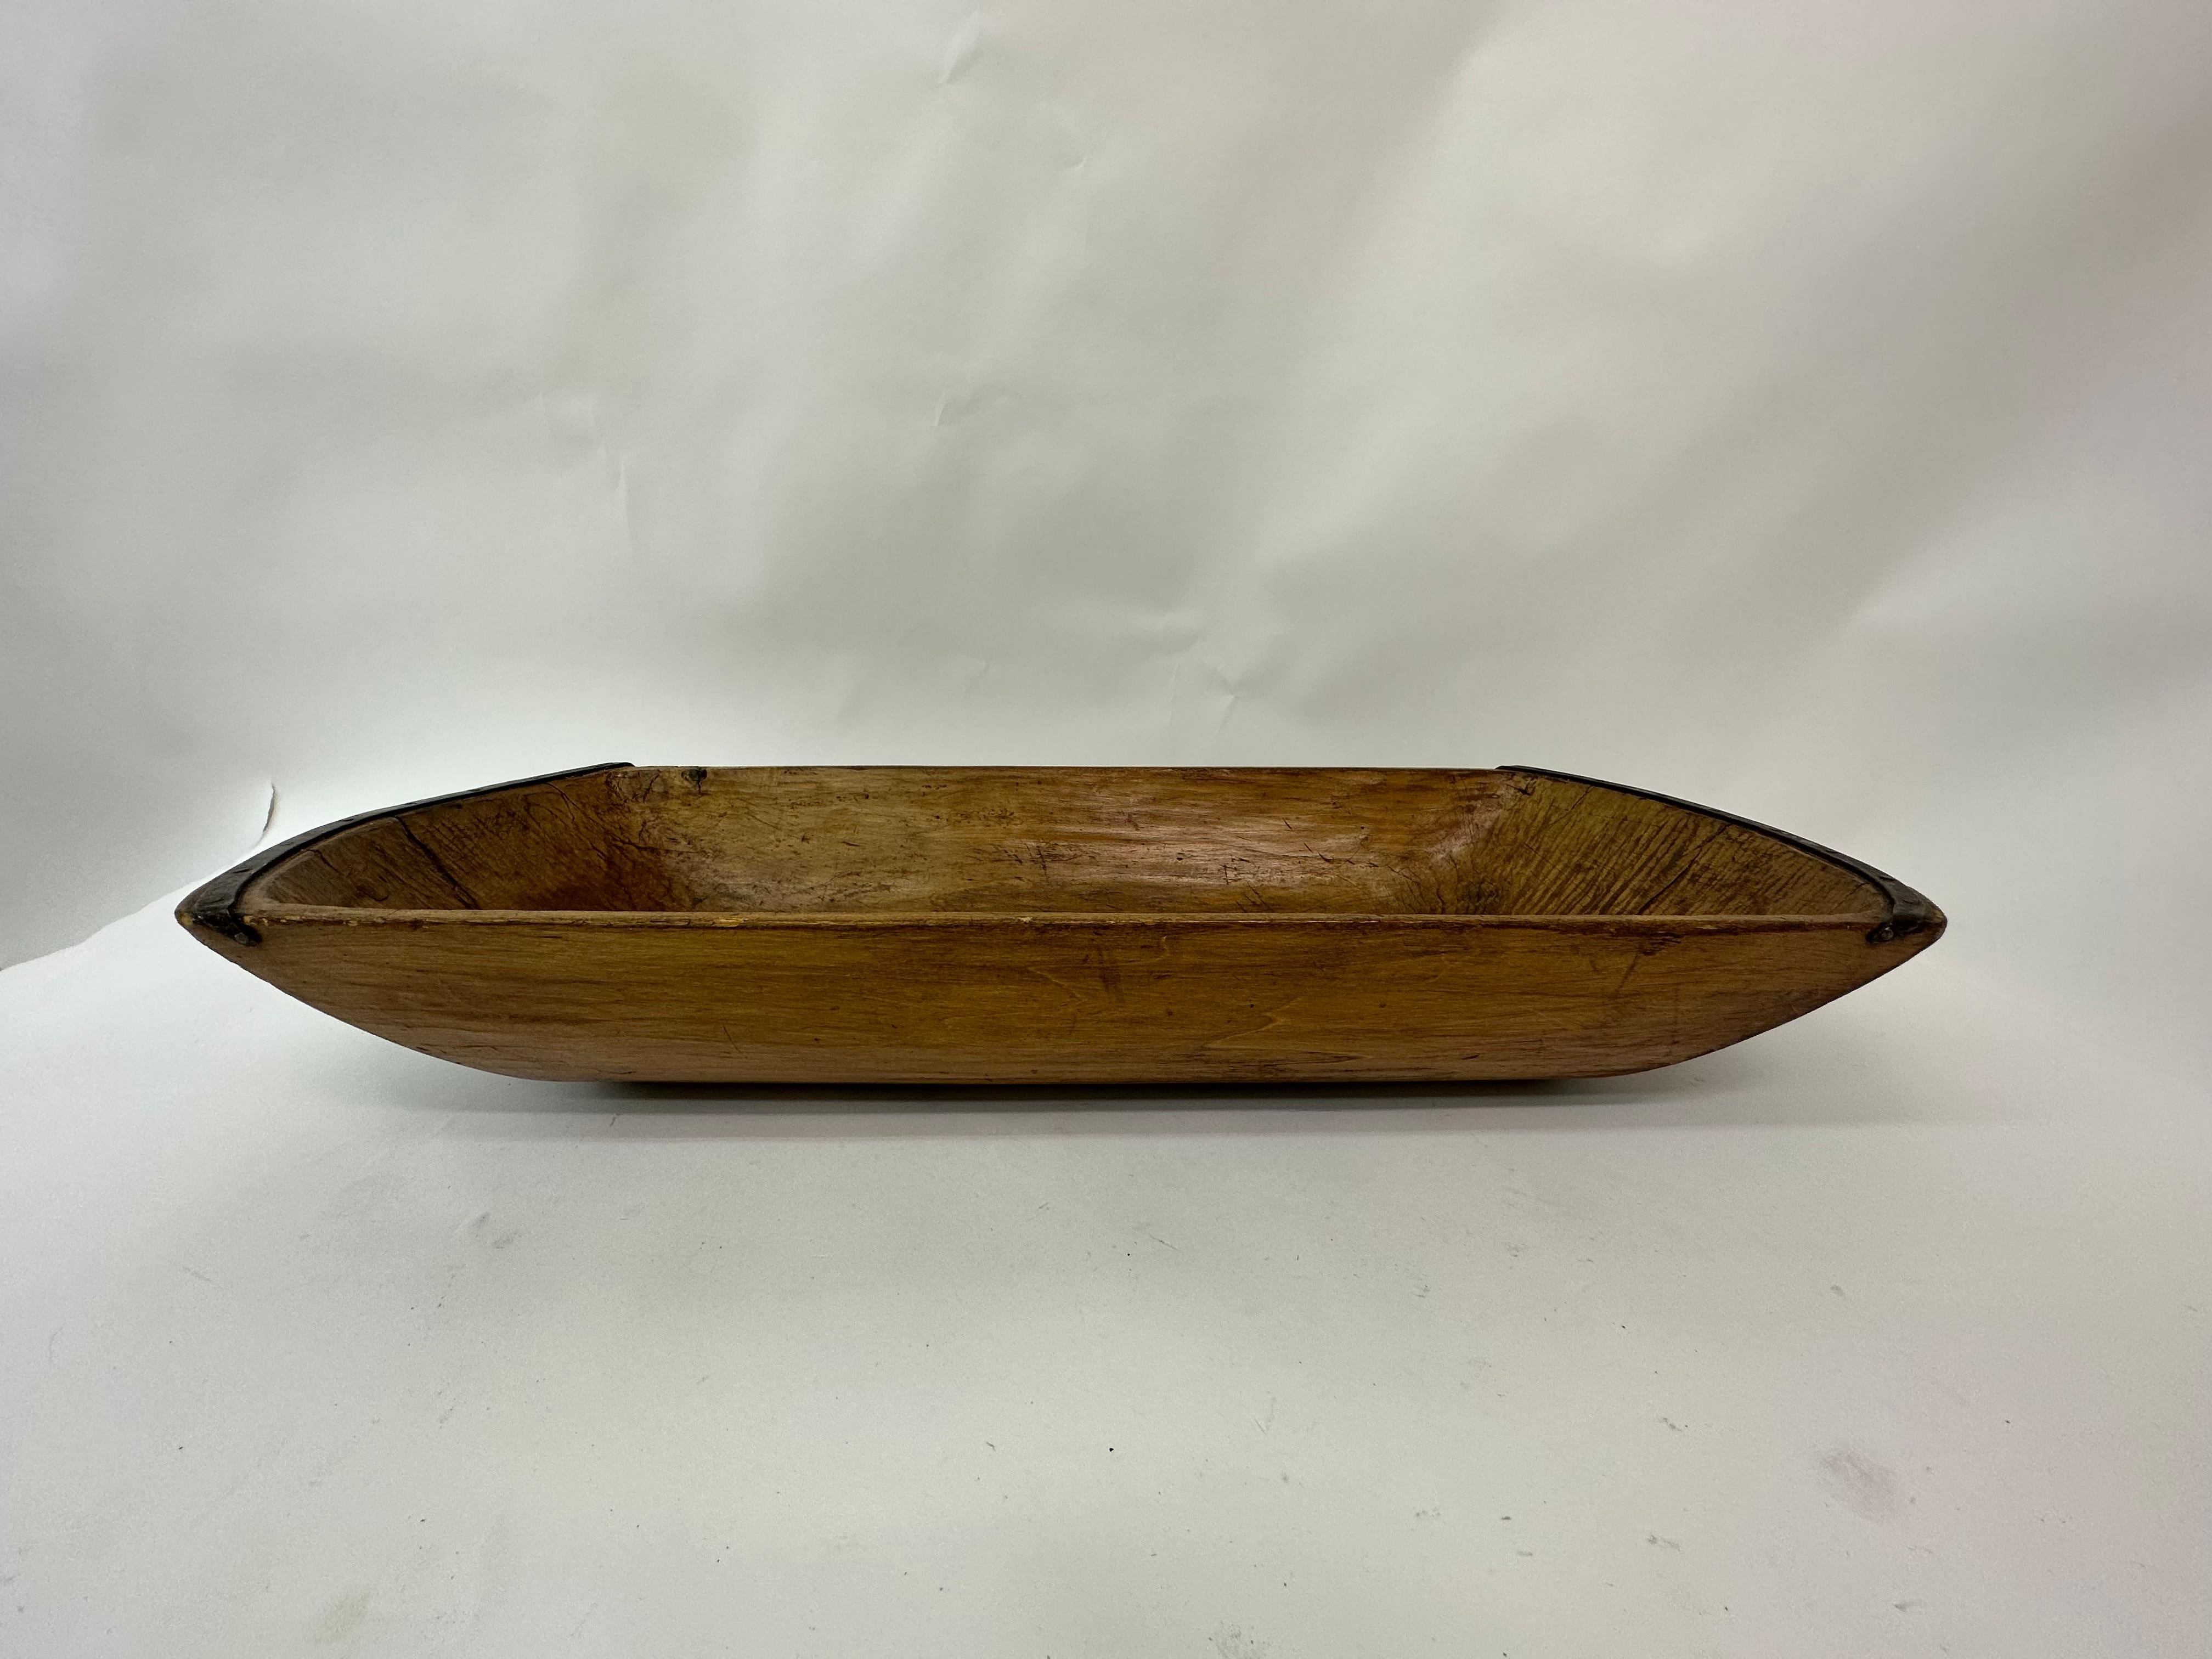 Antique wooden dough trough in unrestored, untreated original condition. A beautiful home decoration that can be used in many different ways.
Dimensions: 91cm W, 36cm D, 15cm H
Period: 1900
Material: Wood
Condition: Good